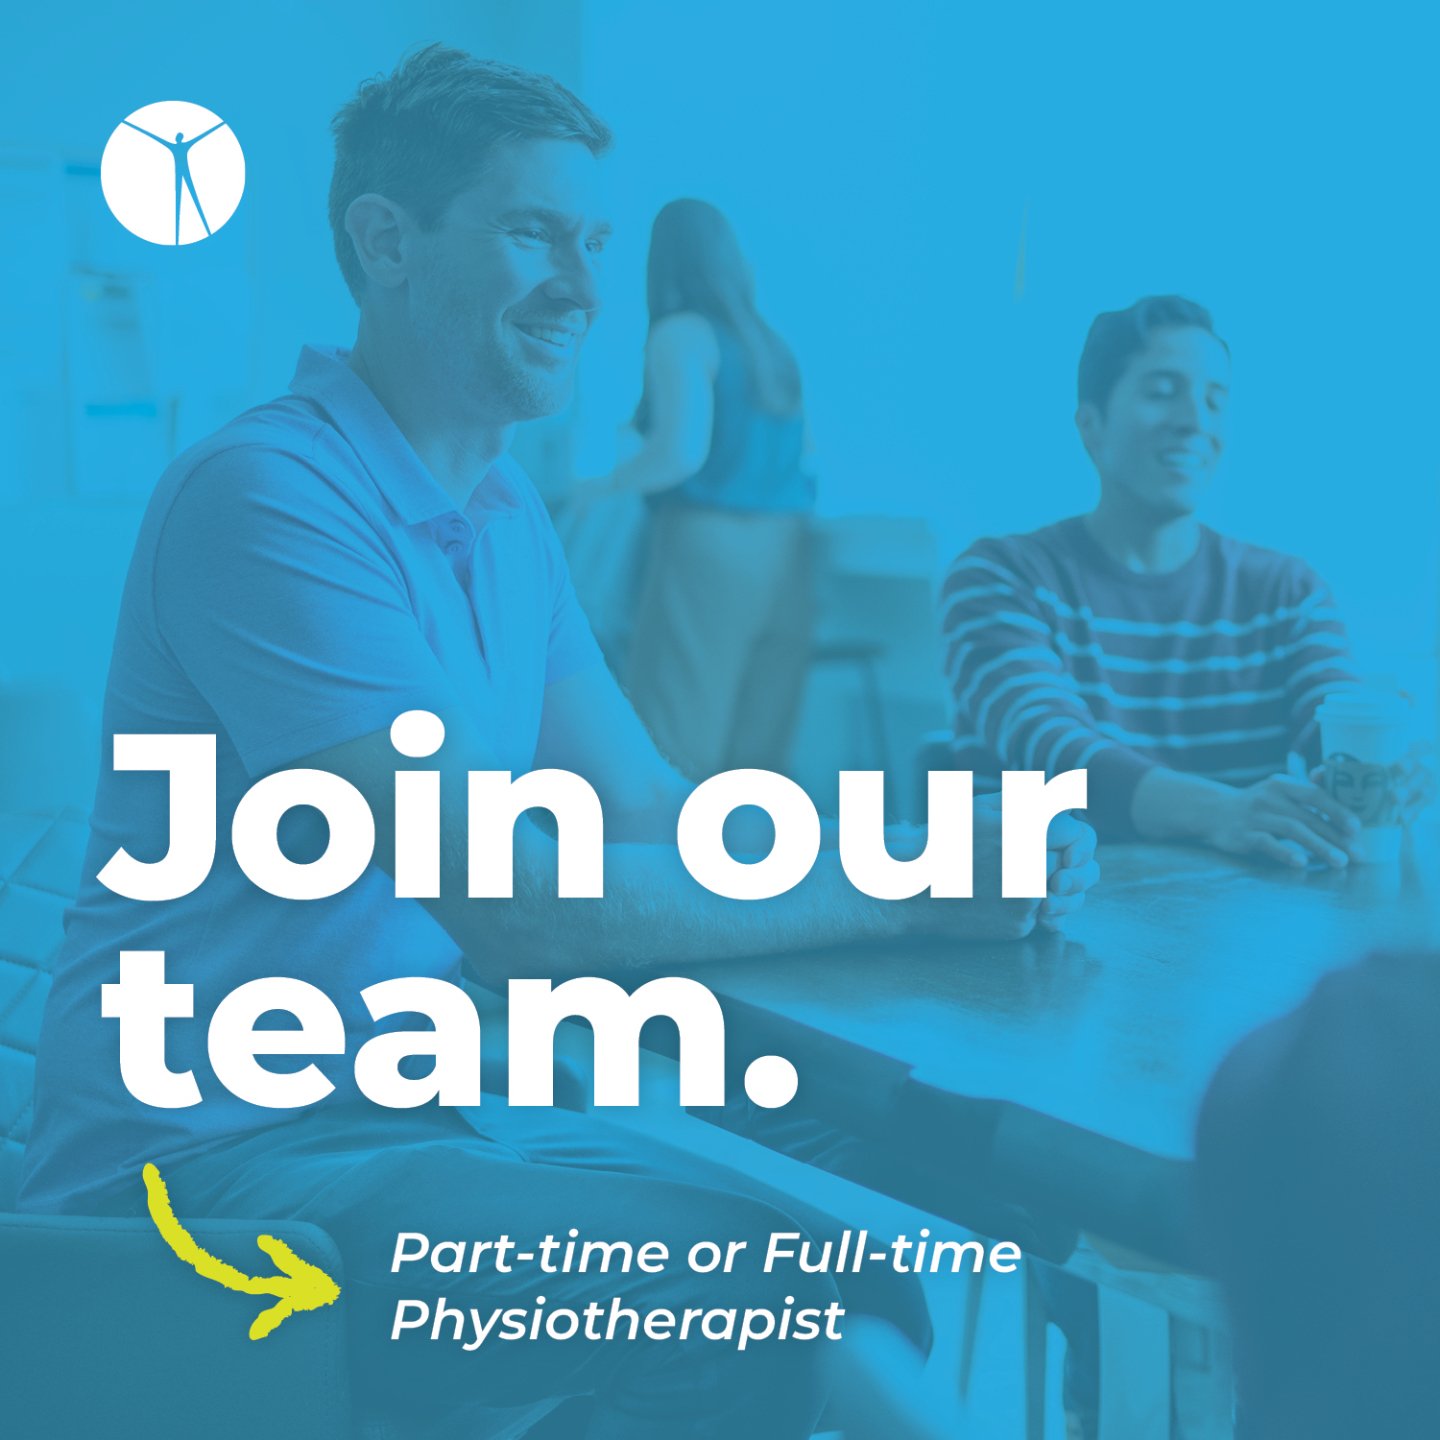 Calling all Physiotherapists! Hydrathletics is currently looking for a part-time or full-time physiotherapist to join our team. 

Are you interested in joining an interdisciplinary team of healthcare professionals who are fun, friendly, and dedicated